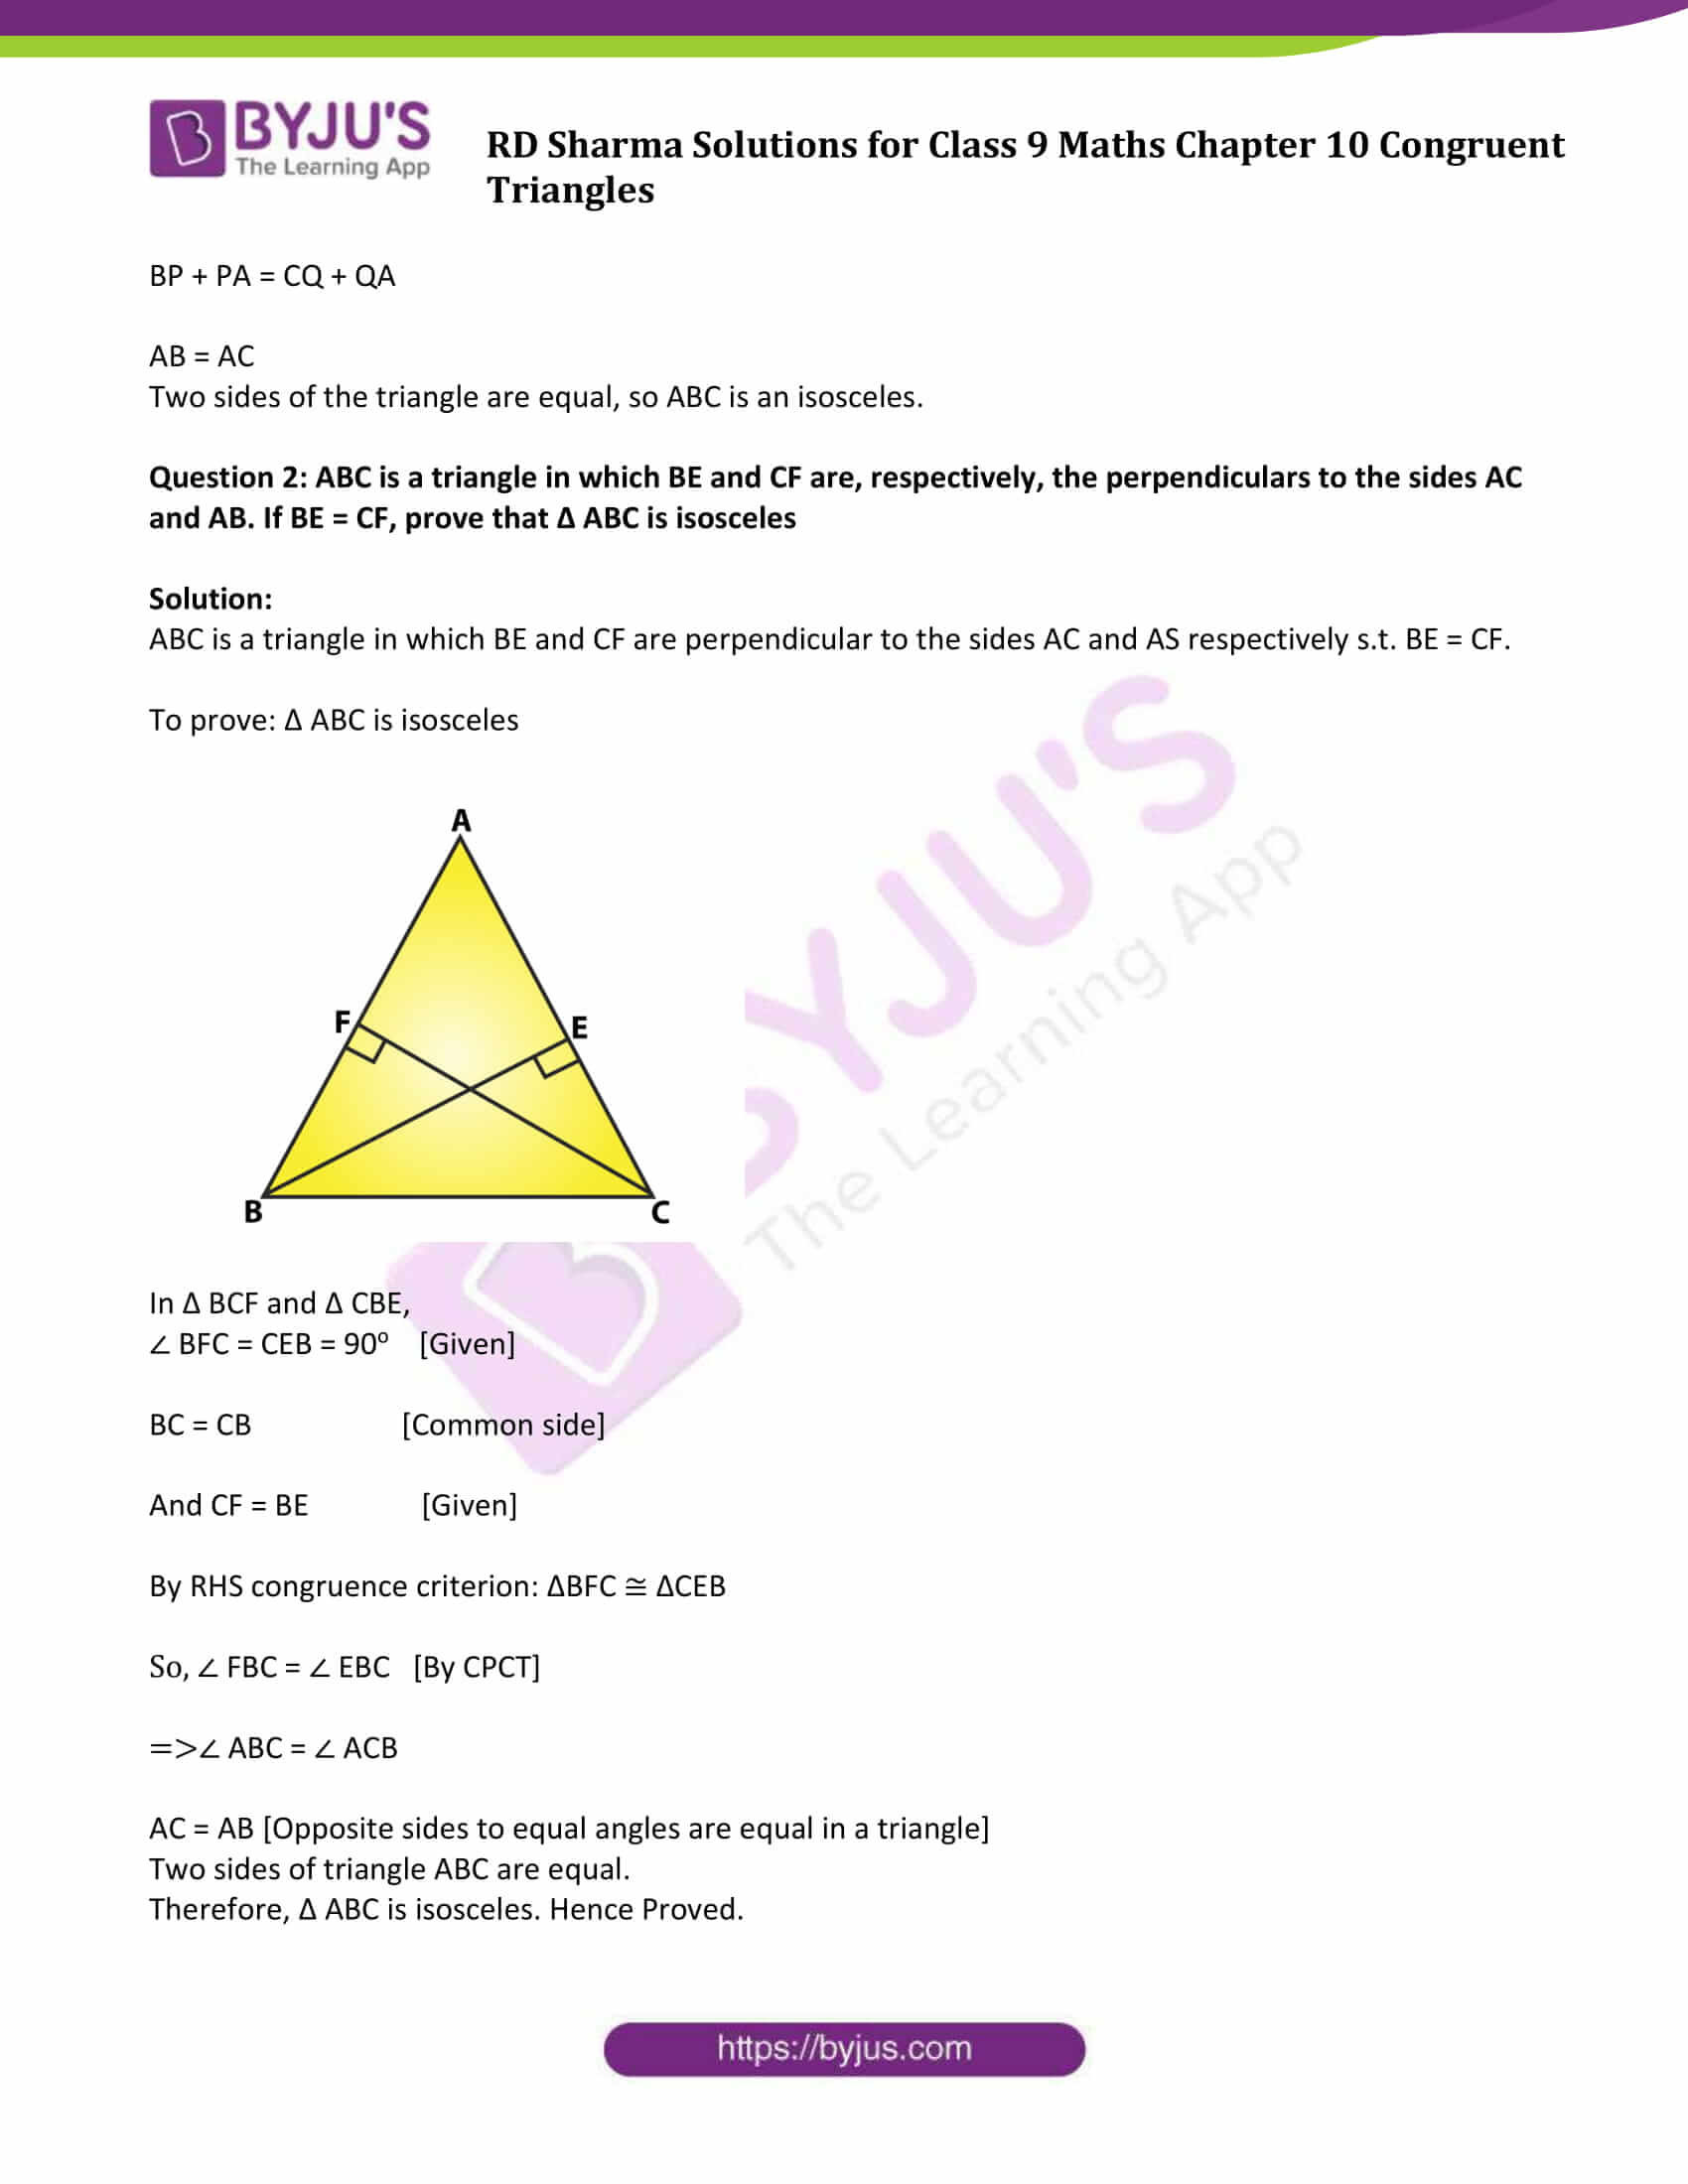 Triangle Congruence Practice Worksheet Rd Sharma solutions Class 9 Chapter 10 Congruent Triangles